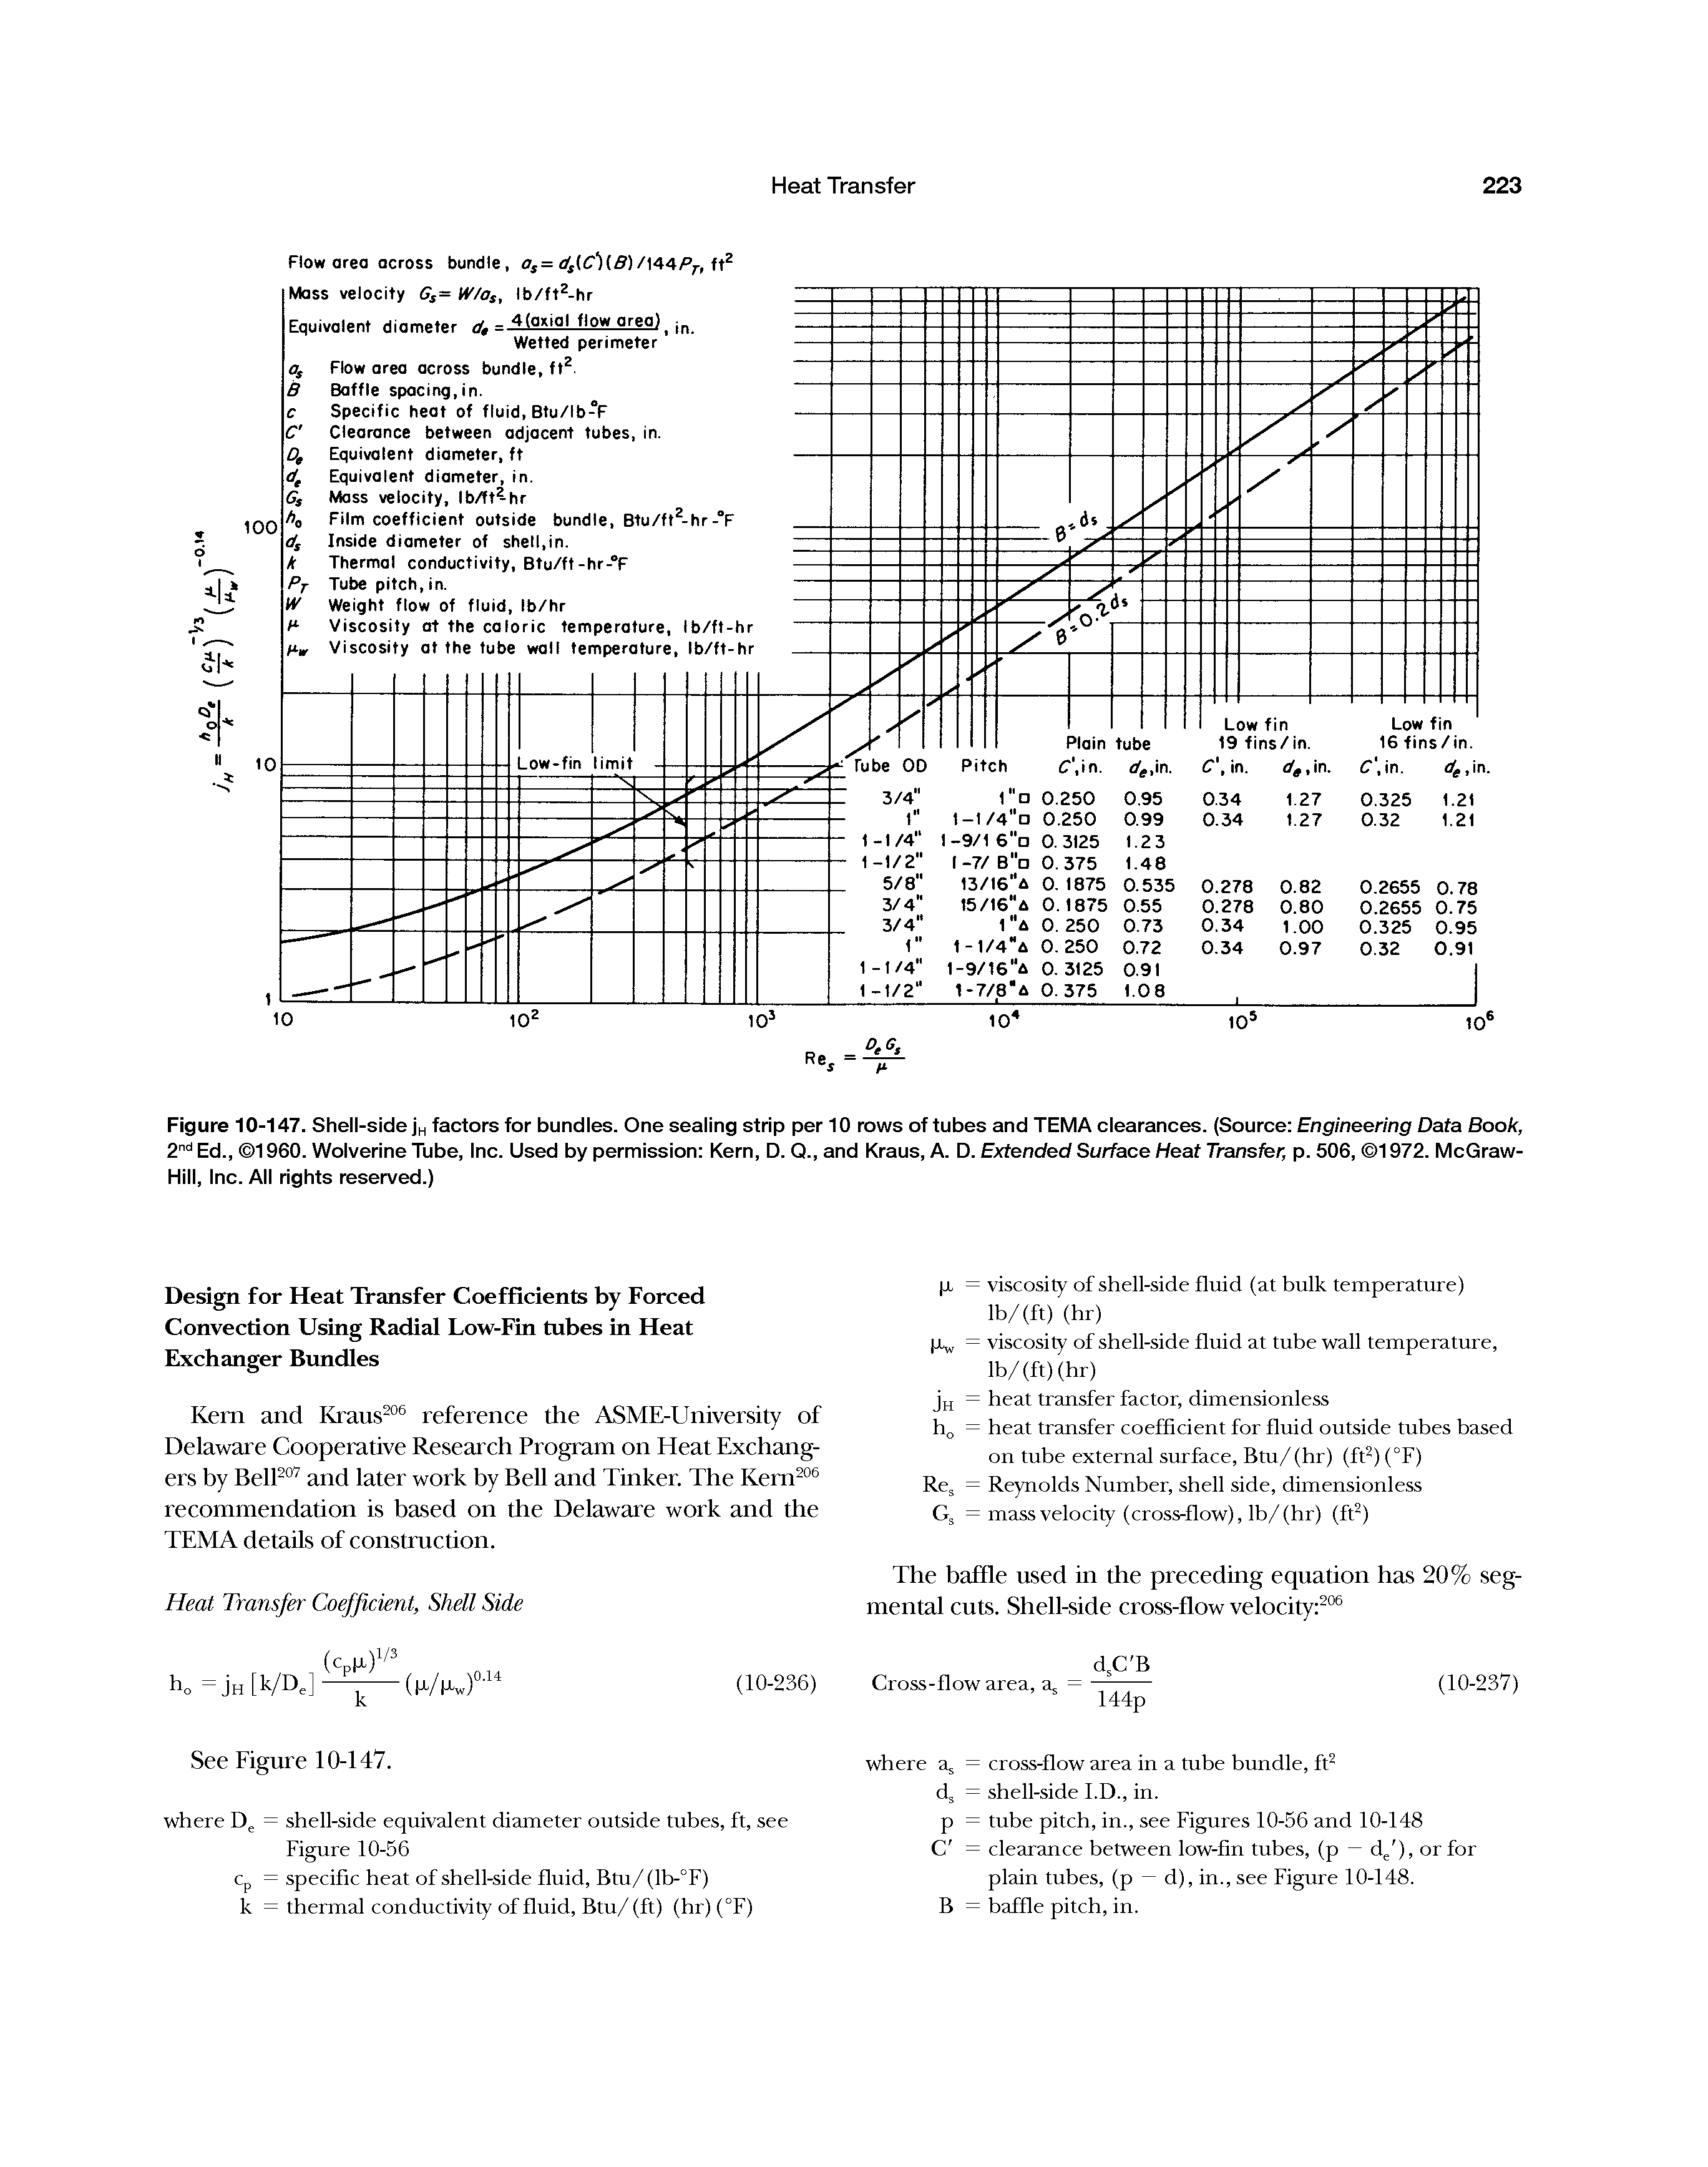 Figure 10-147. Shell-side jn factors for bundles. One sealing strip per 10 rows of tubes and TEMA clearances. (Source Engineering Data Book, 2" Ed., 1960. Wolverine Tube, Inc. Used by permission Kern, D. Q., and Kraus, A. D. Extended Surface Heat Transfer, p. 506, 1972. McGraw-Hill, Inc. All rights reserved.)...